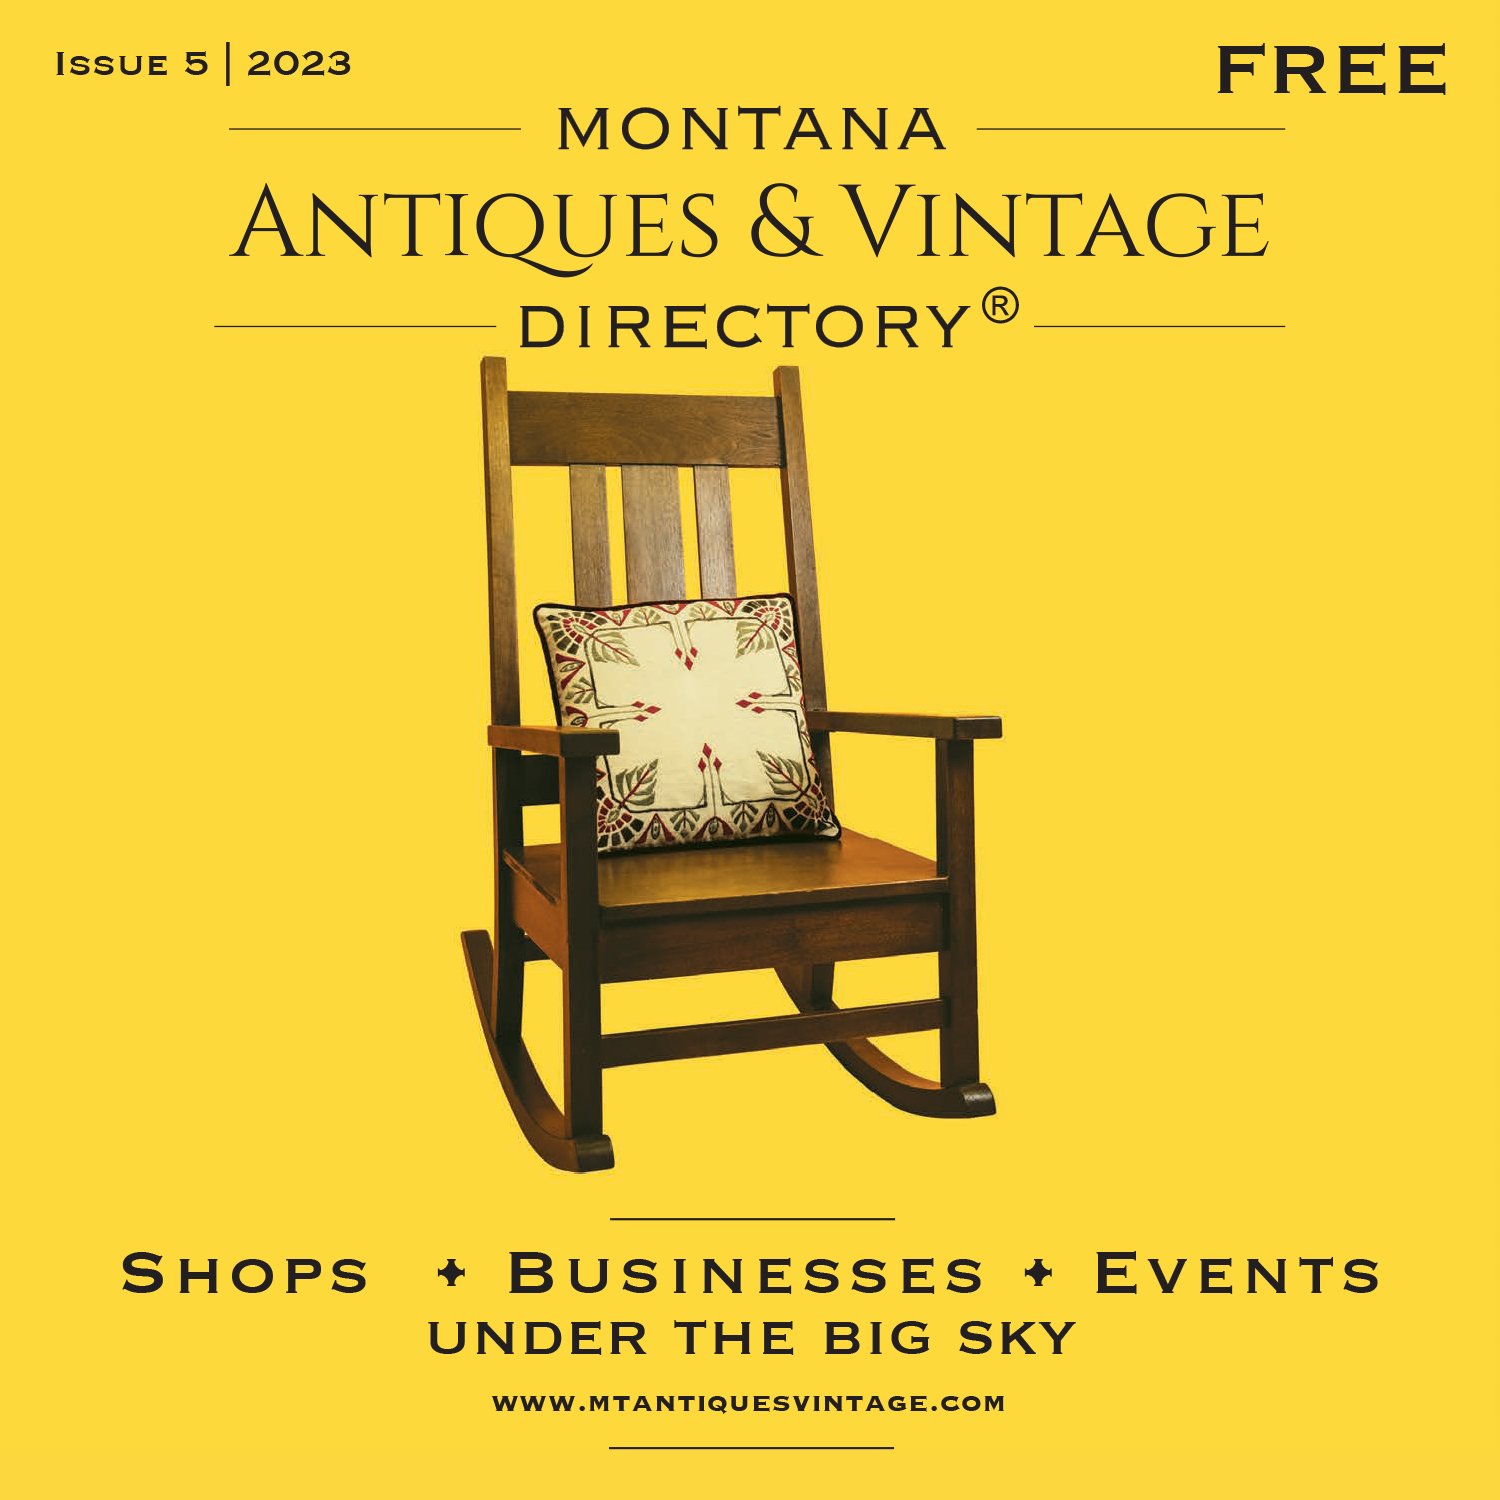 ISSUE — Montana Antiques & Vintage Directory